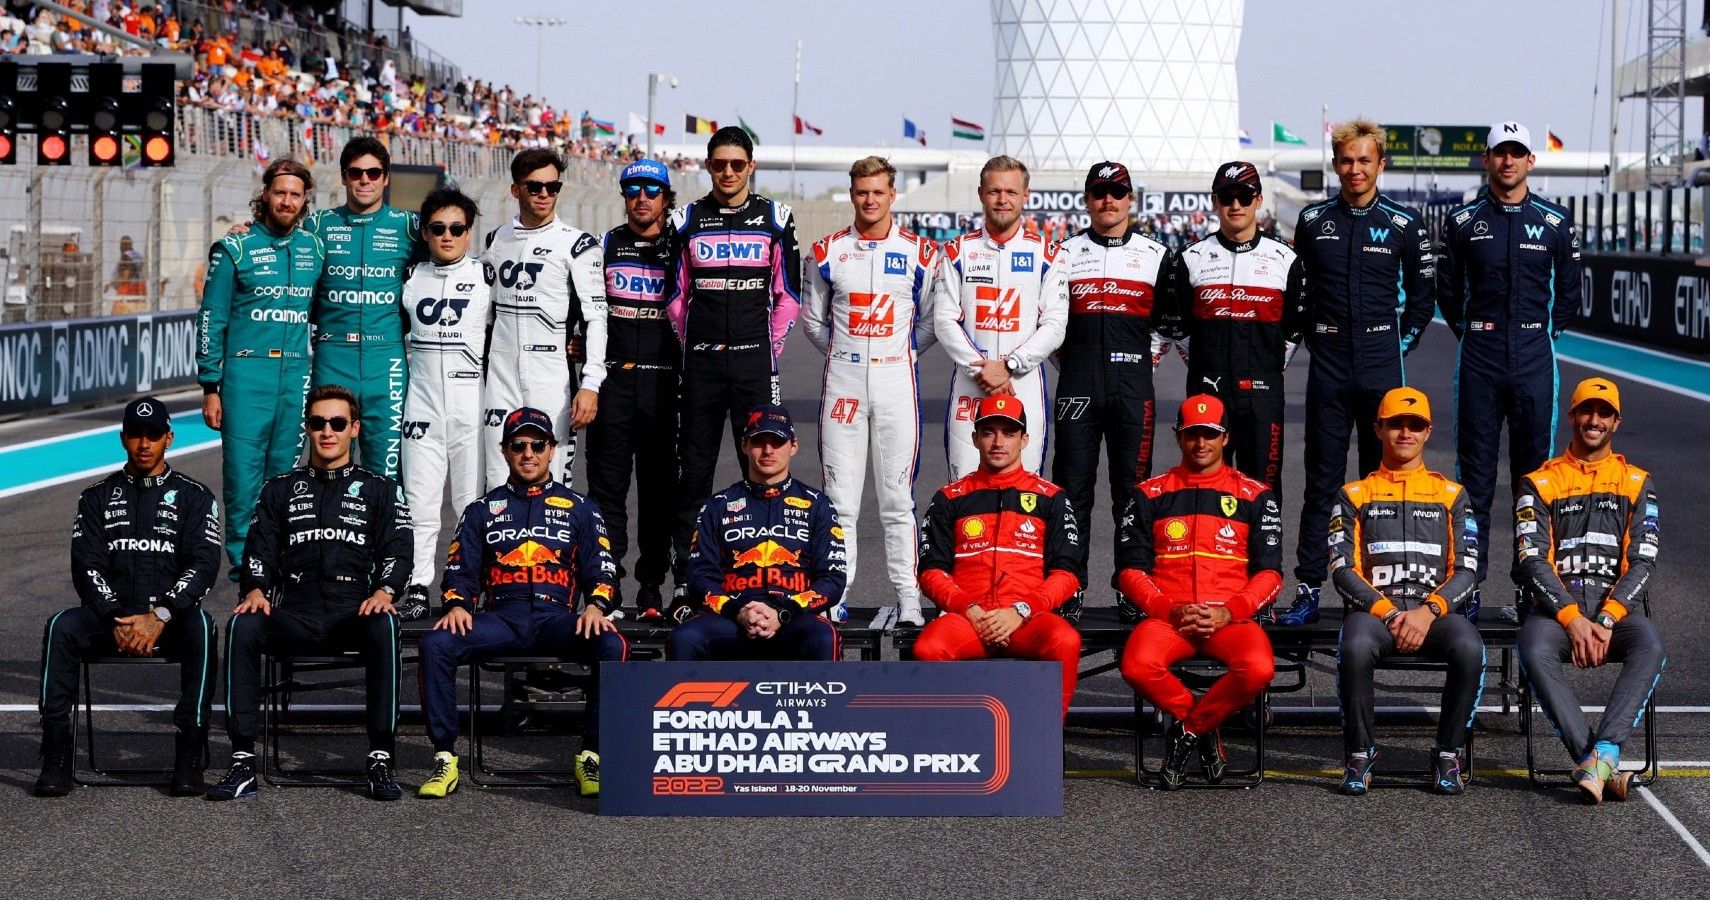 10 Richest F1 Drivers On The Grid Today